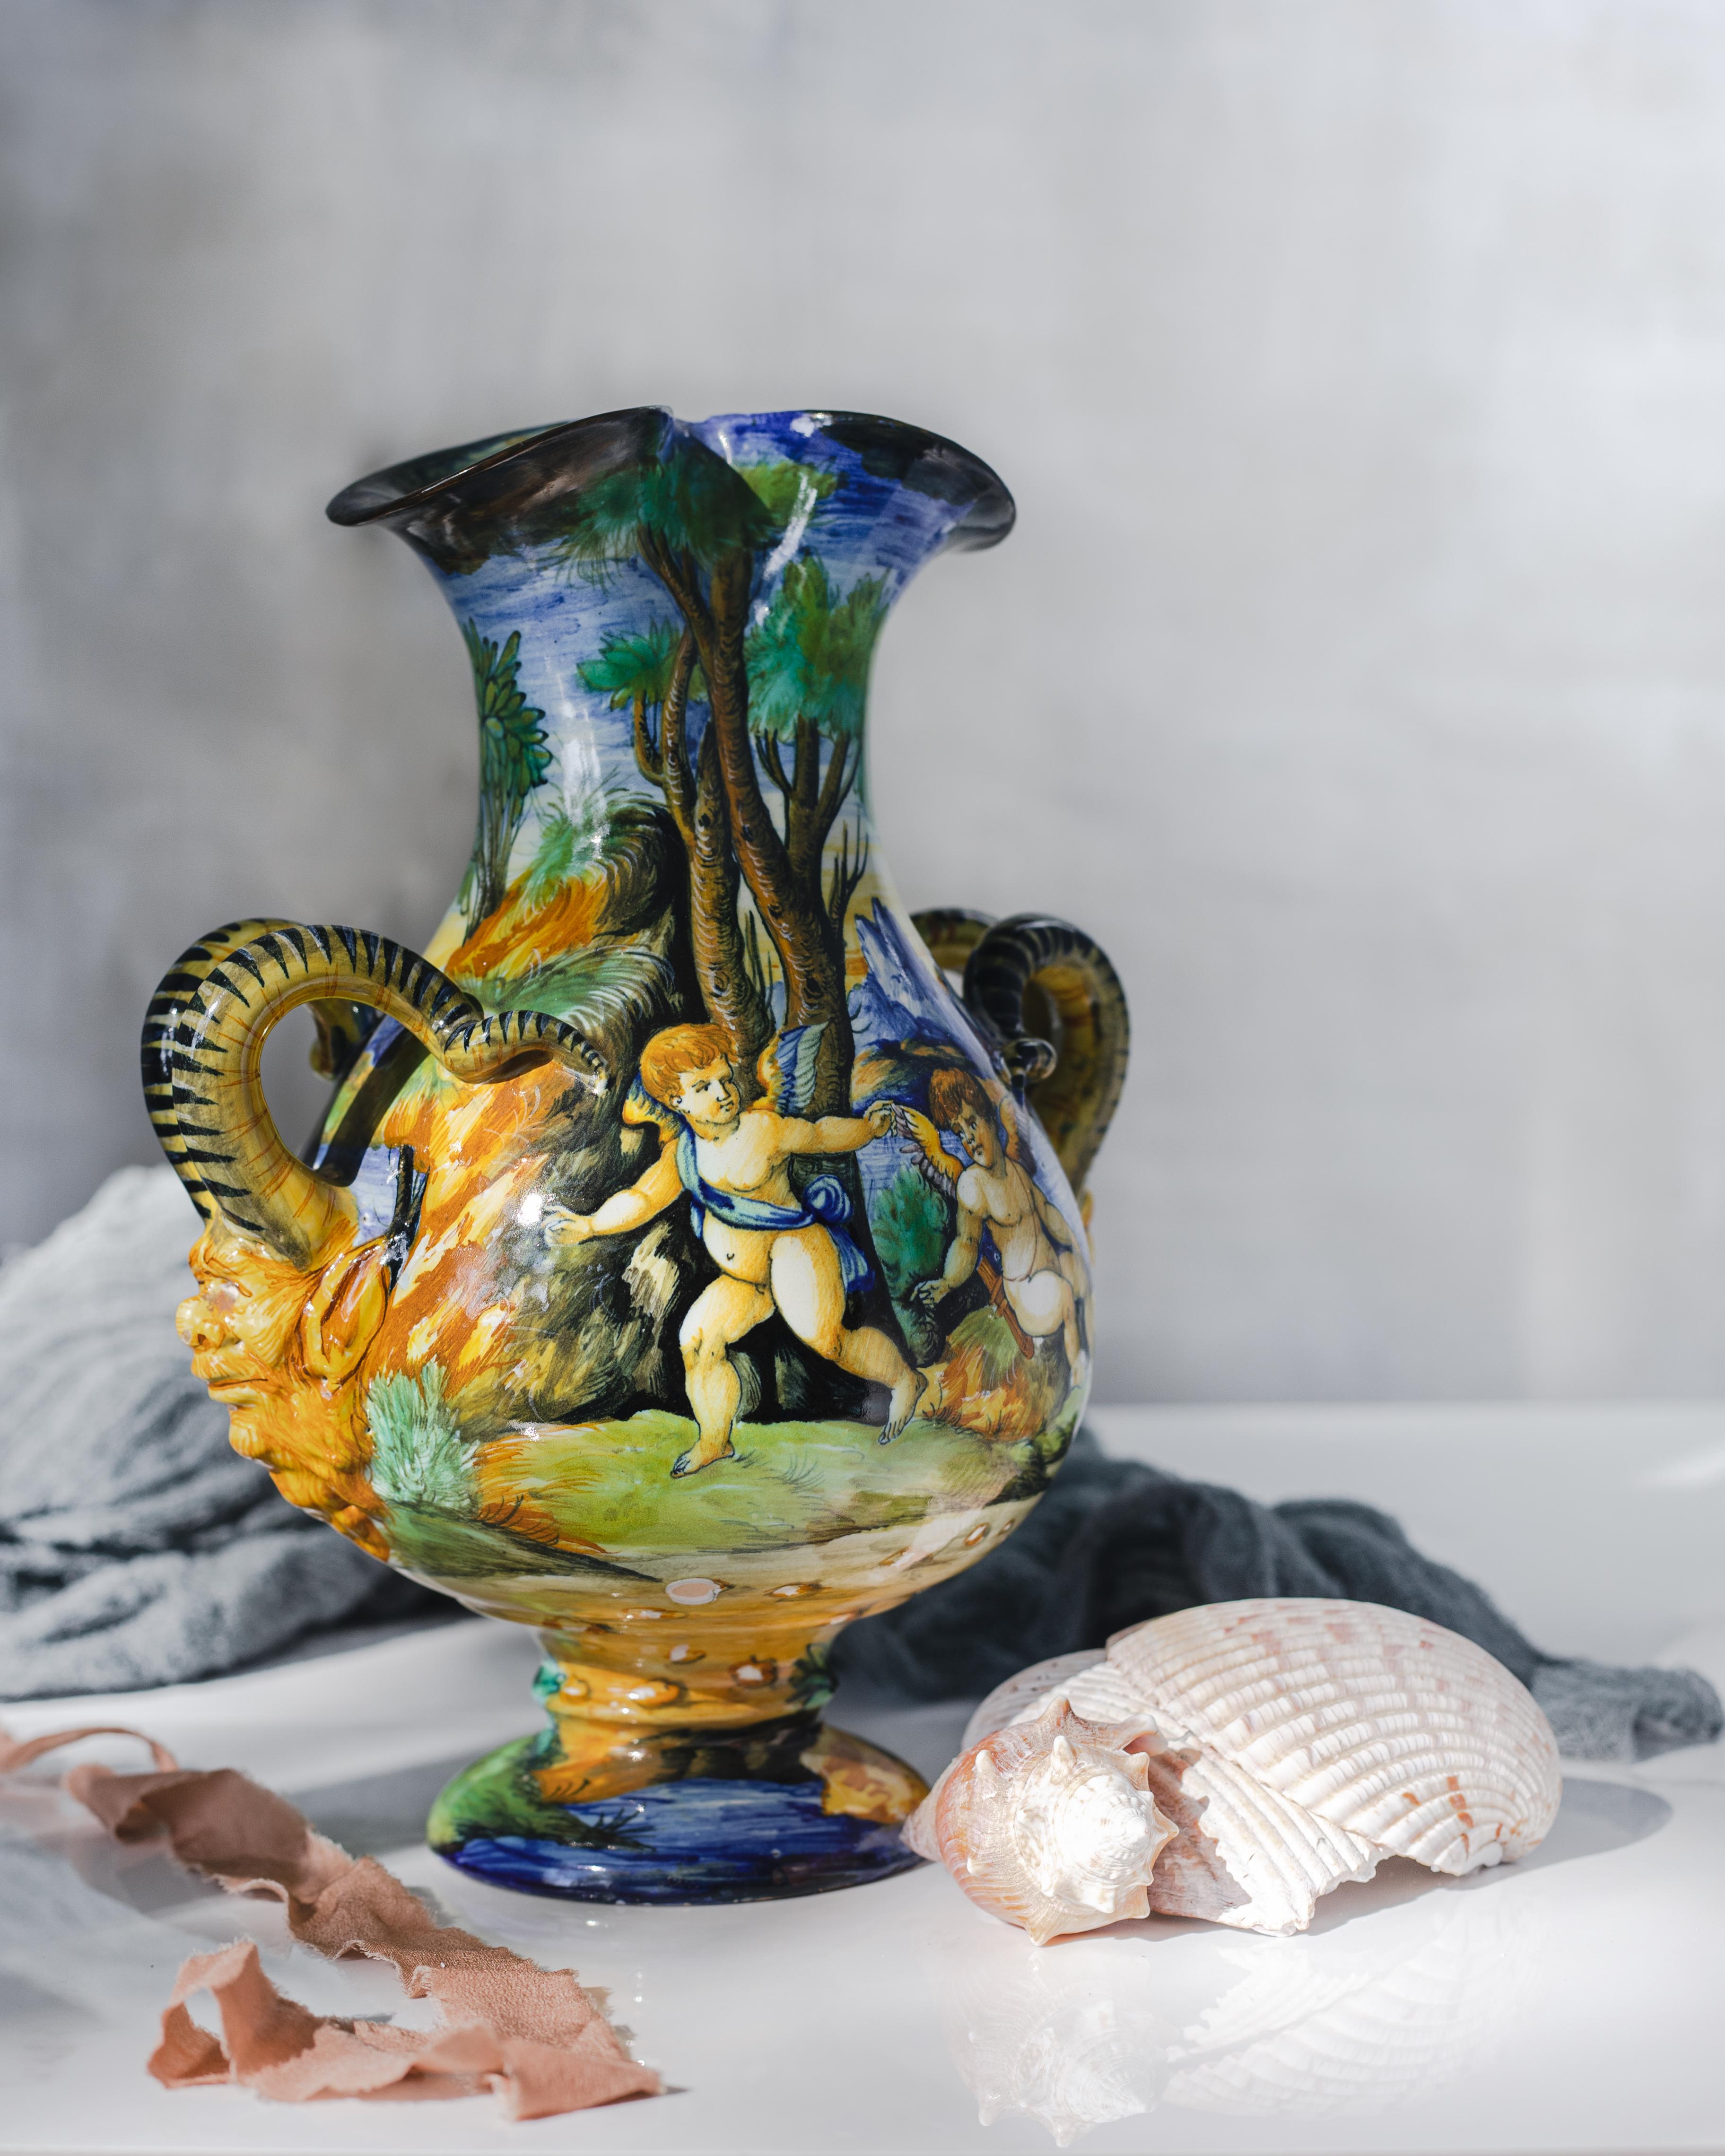 An Italian maiolica vase made by Ulisse Cantagalli (1839-1901) in the last quarter of the 19th century.

Harkening back to the Italian Renaissance, Cantagalli’s styles, designs, and motifs are inspired by Renaissance ceramics, such as those made in